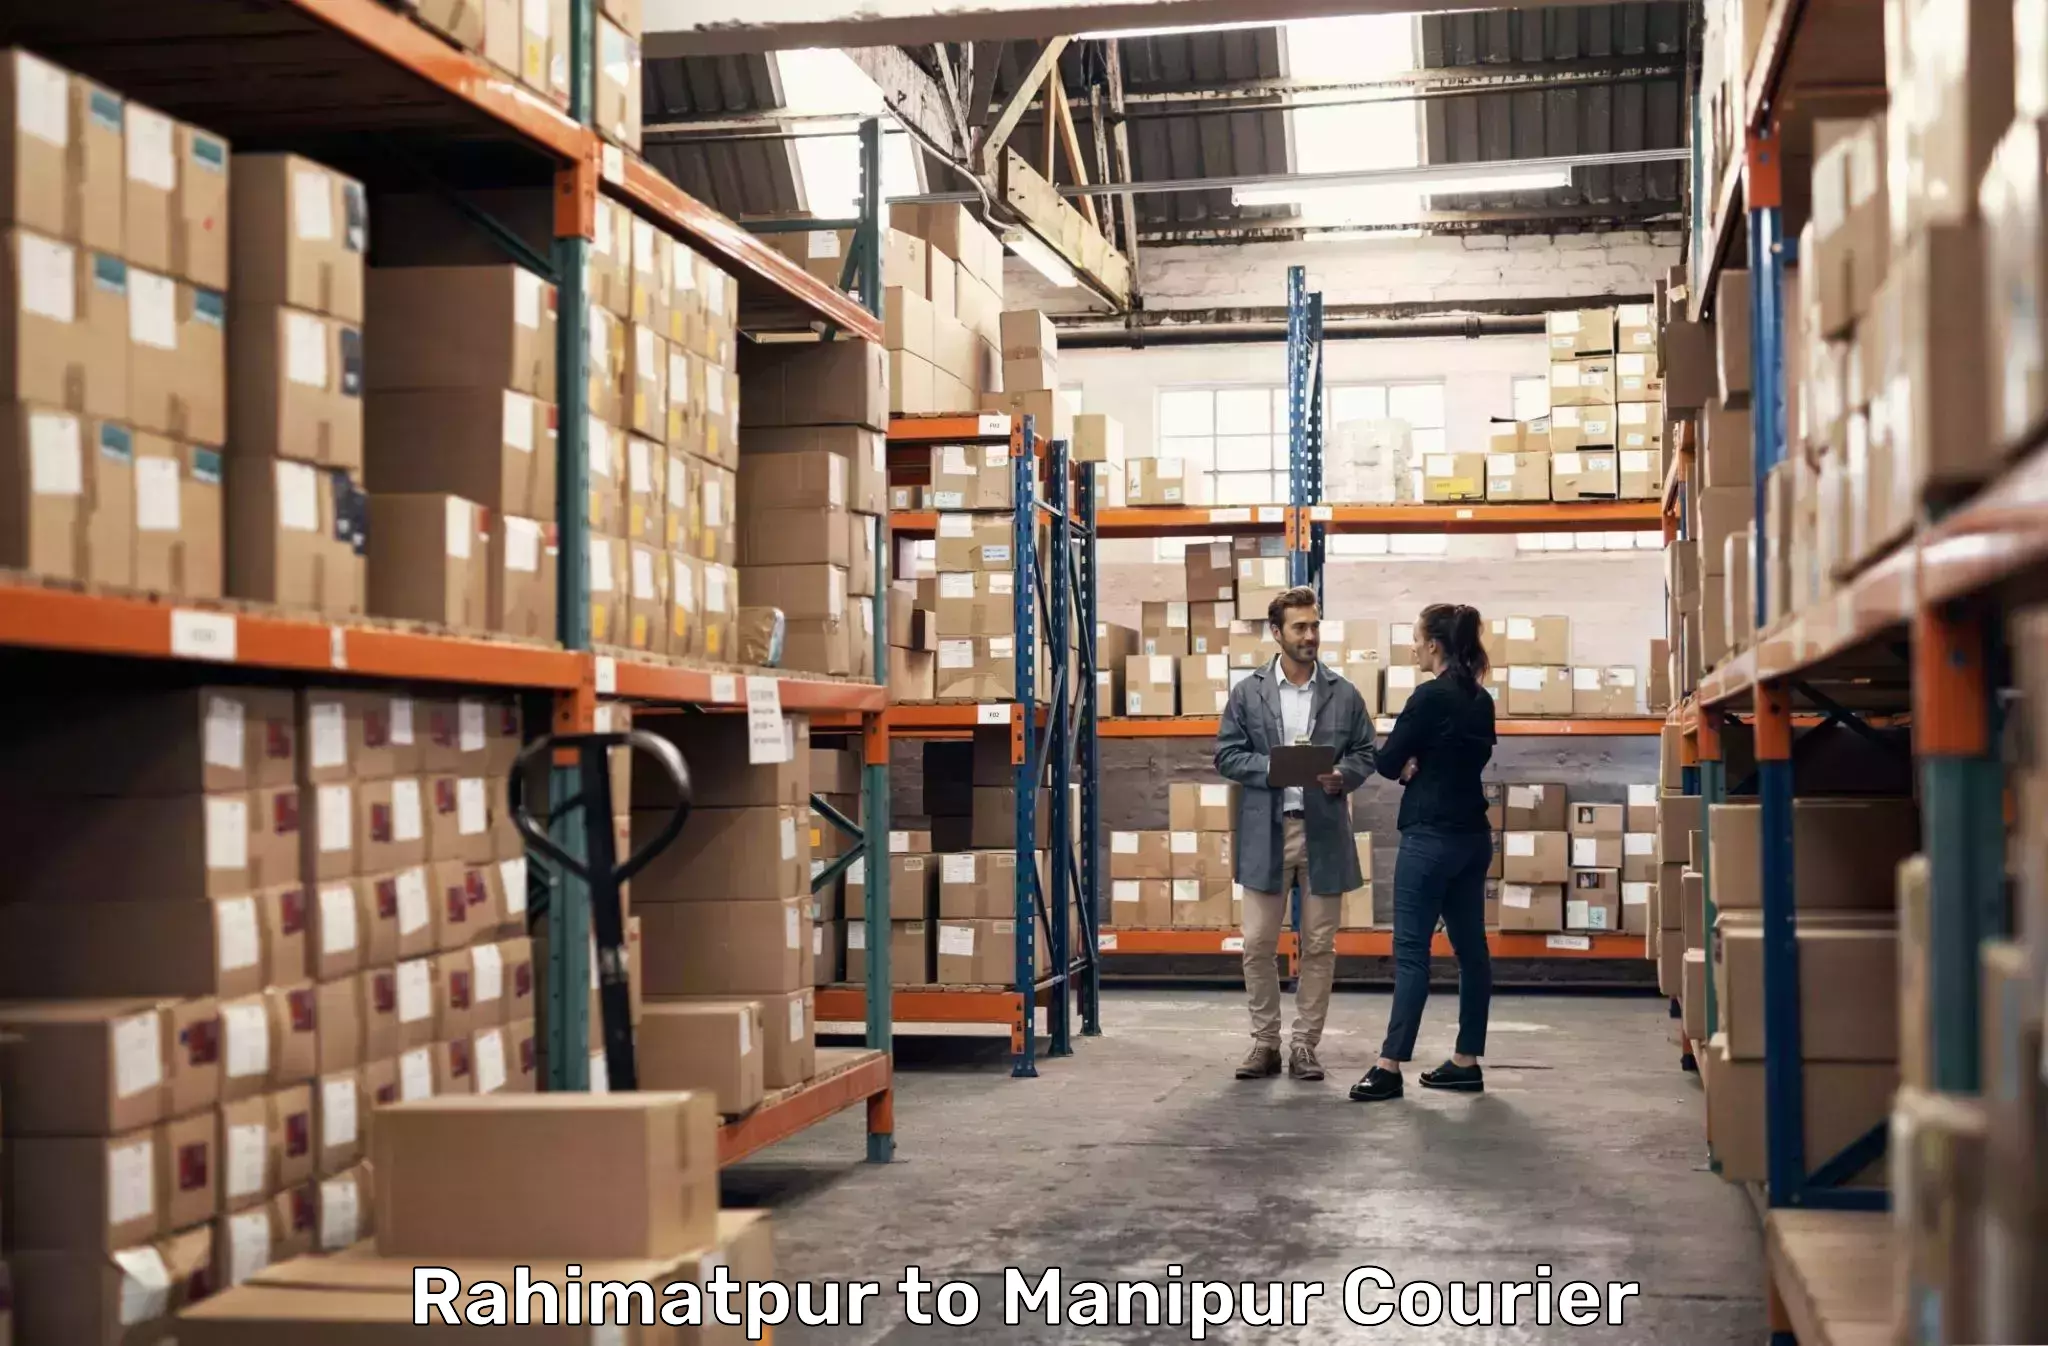 Speedy delivery service Rahimatpur to Manipur